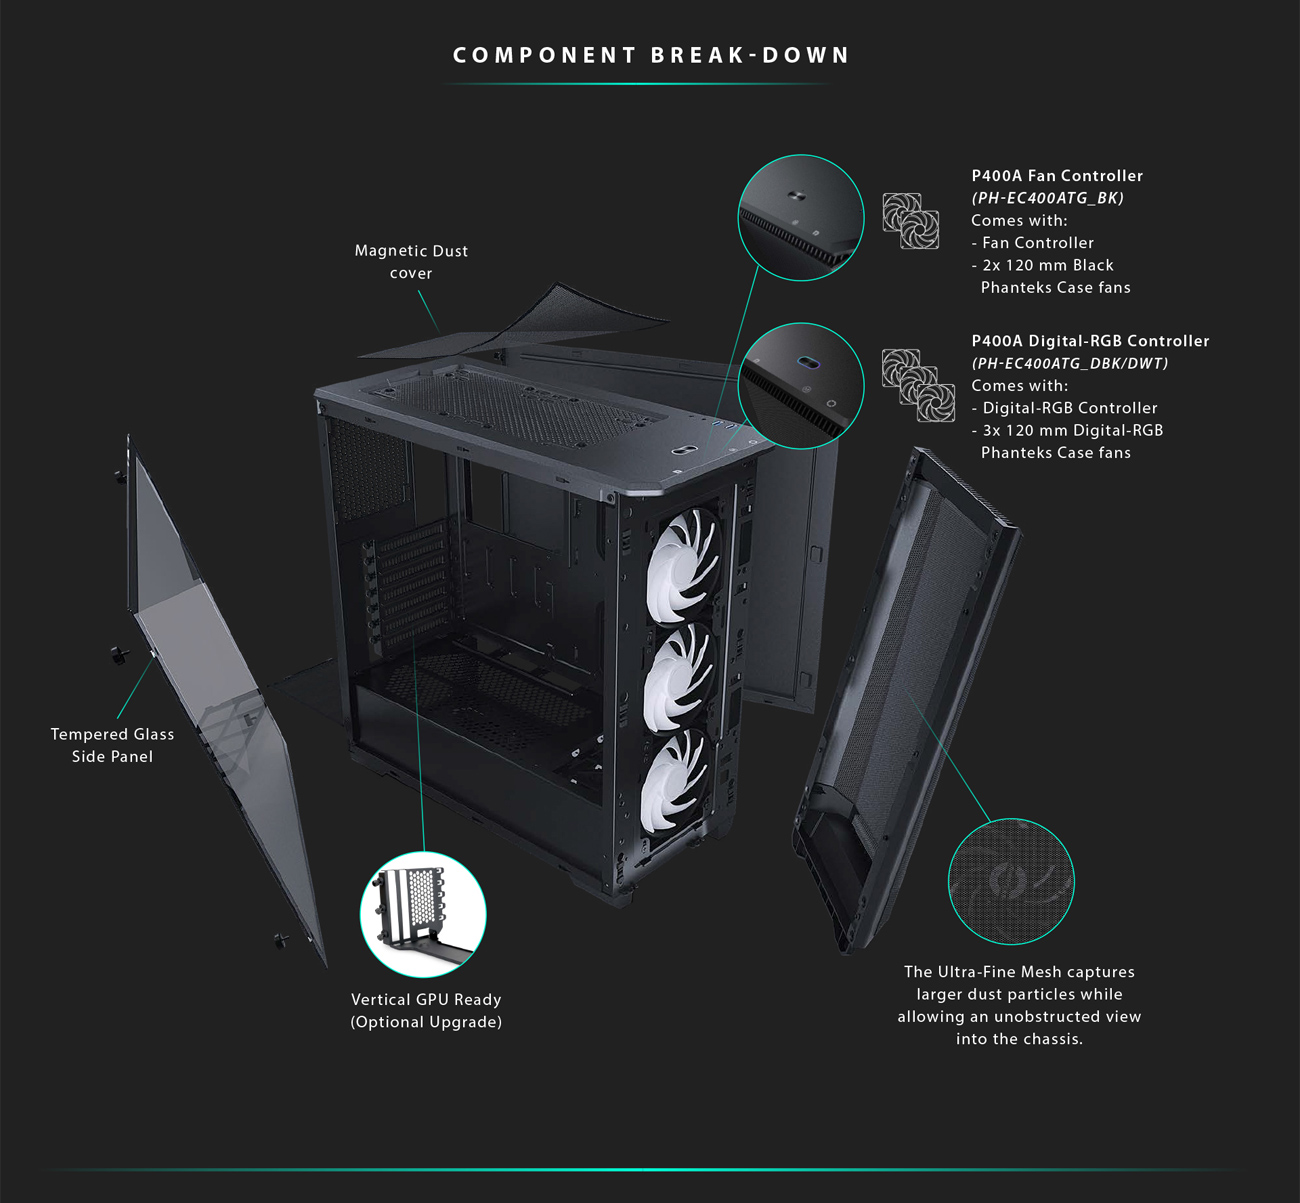 Component Breakdown of the Phanteks Eclipse P400A